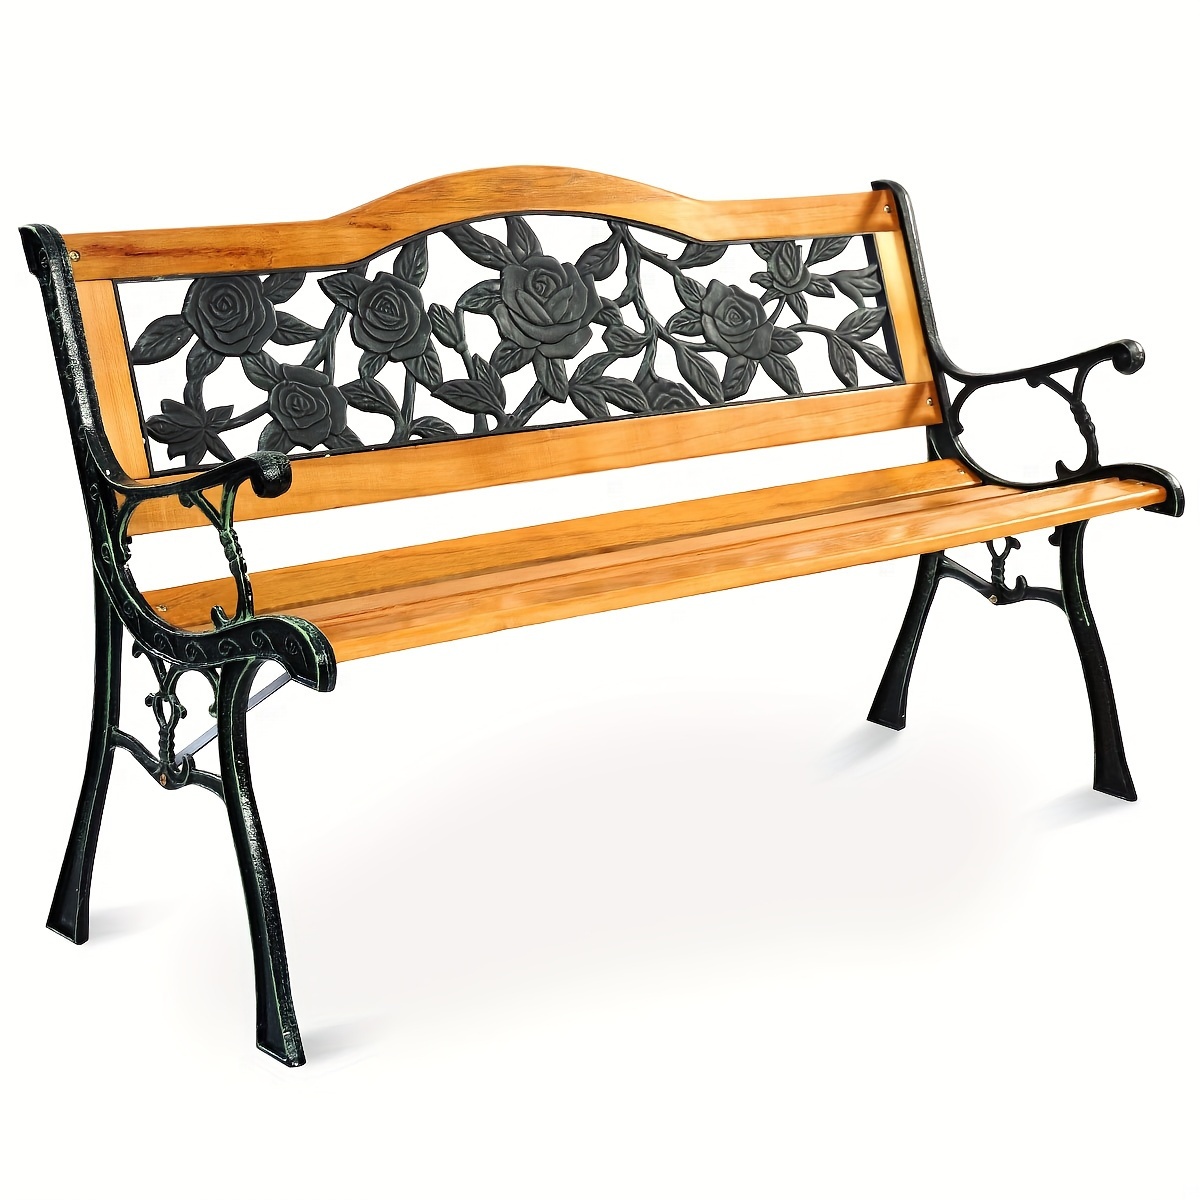 

1pc Outdoor Garden Rose Bench, Deck Hardwood Cast Iron Love Seat, For Patio Front Porch Path Yard Lawn, Outdoor Furniture